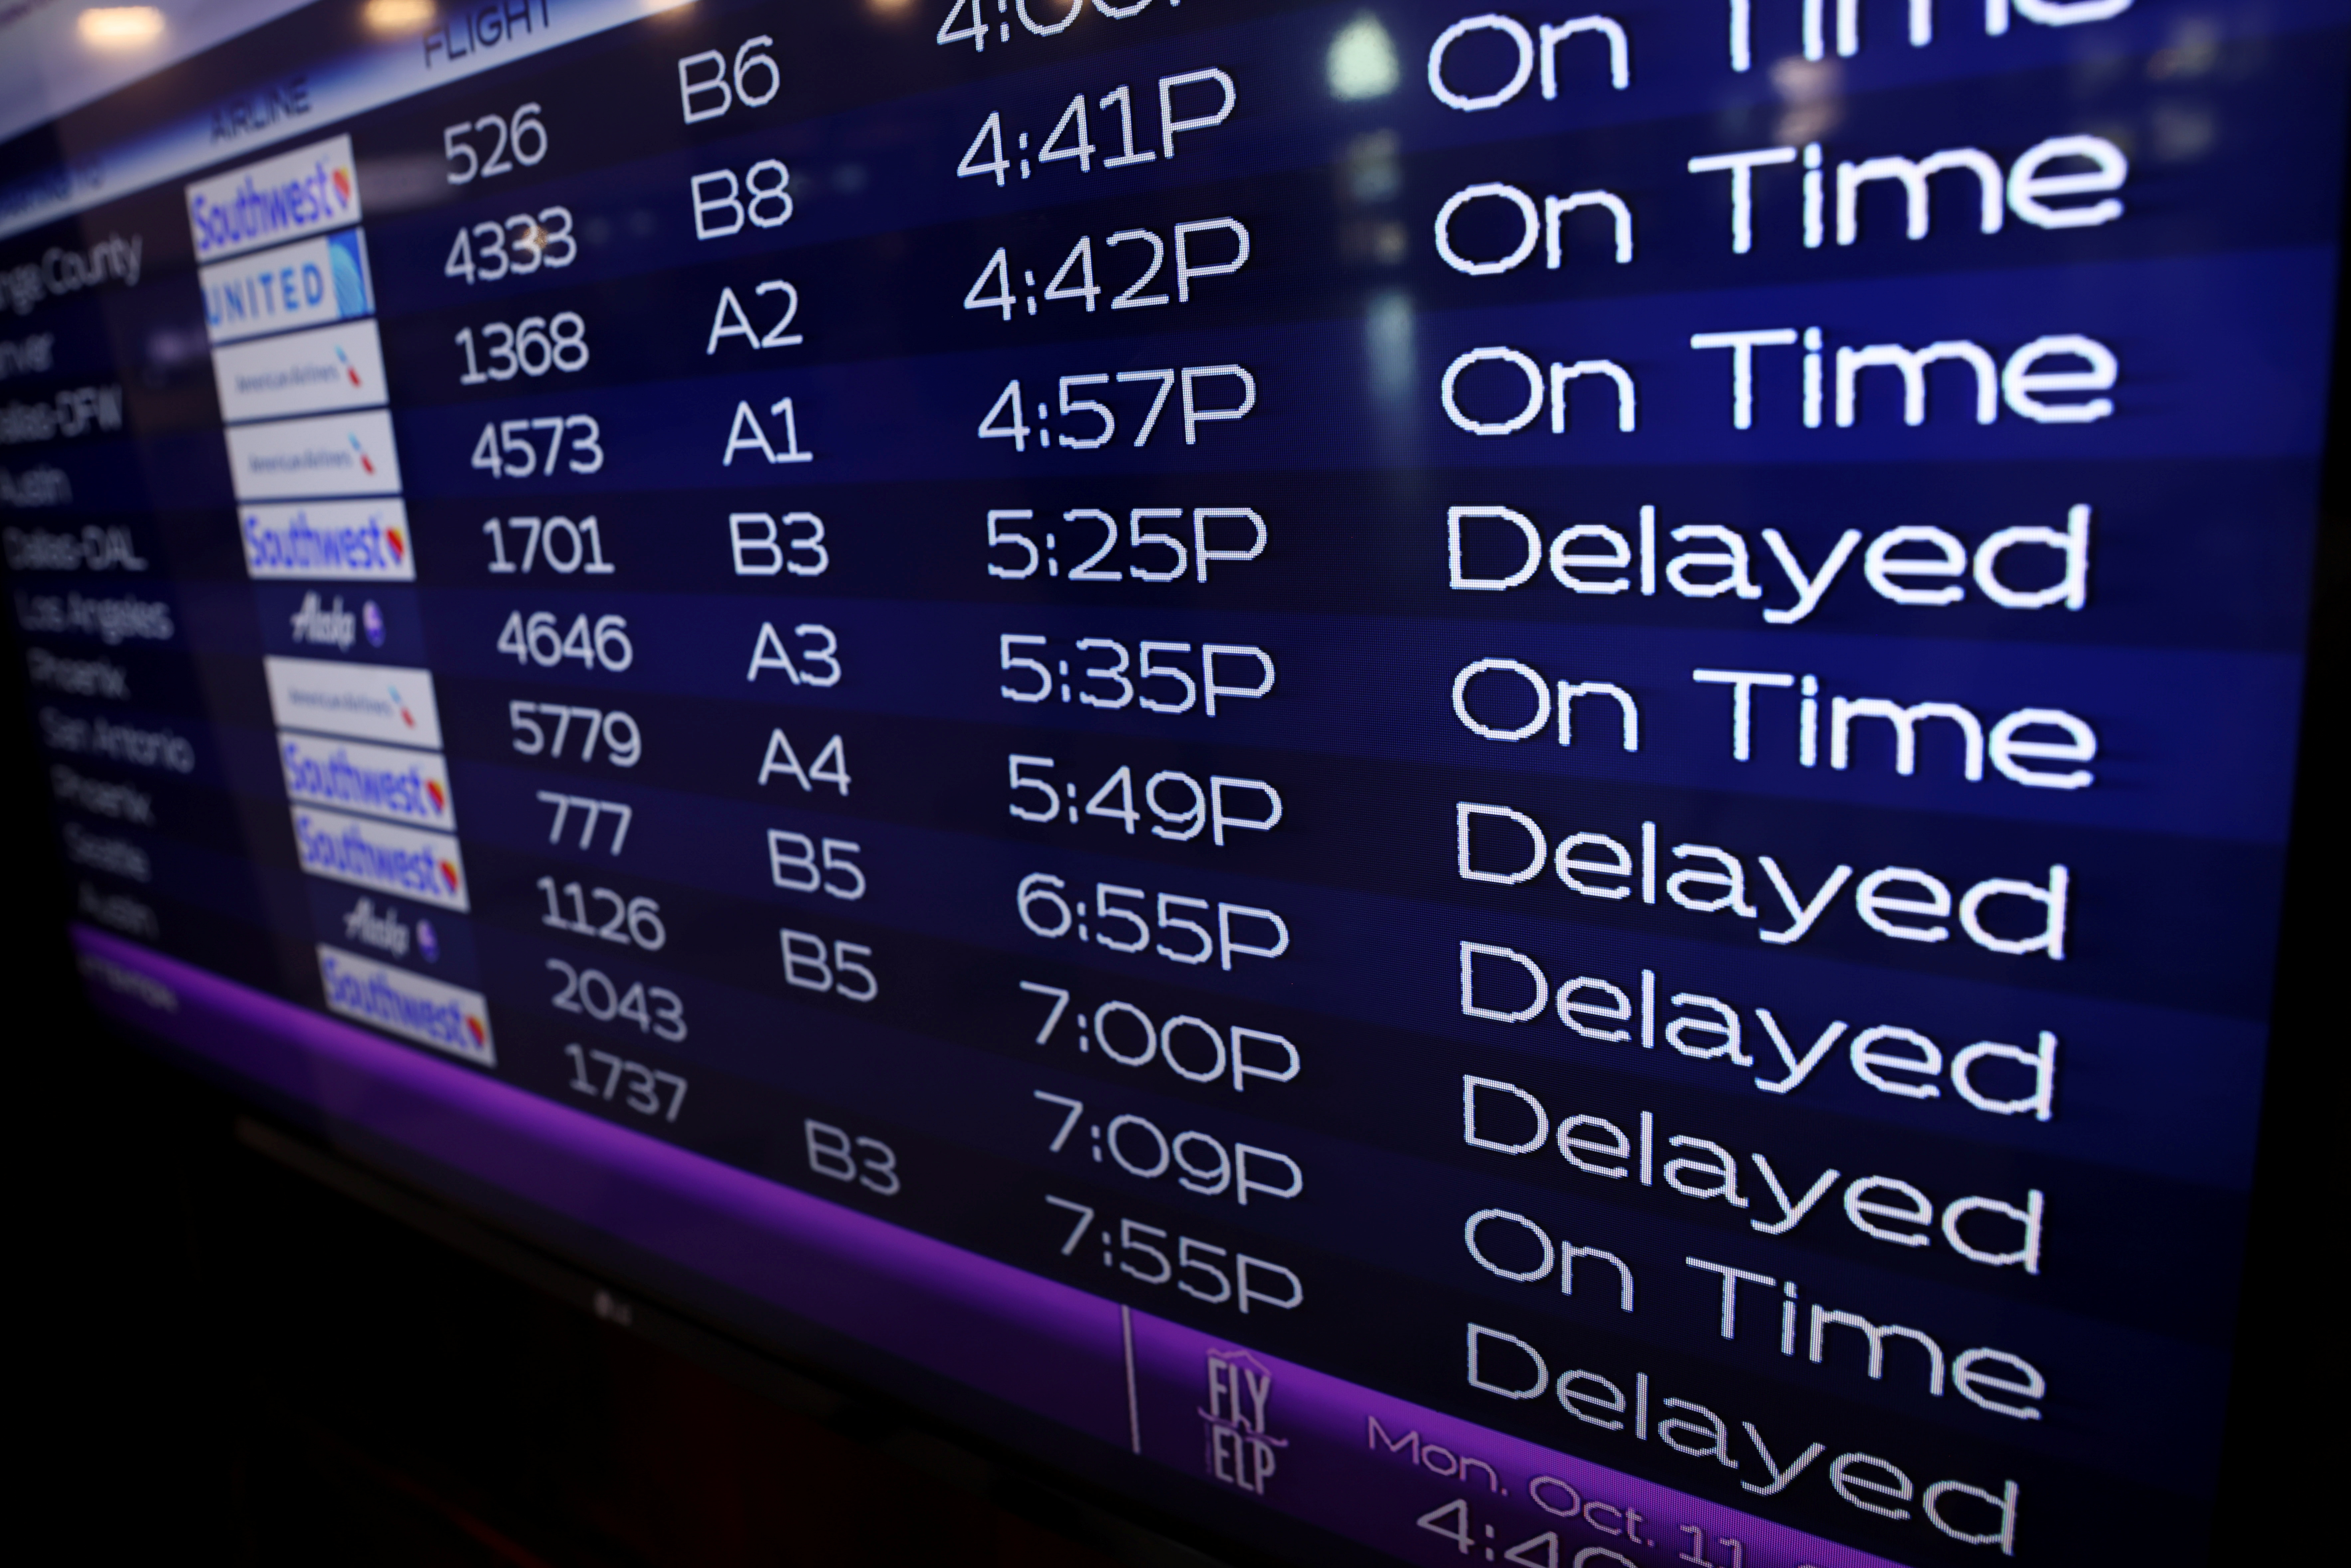 Southwest flight are shown as delayed on the departure screen at the airport in El Paso, Texas,